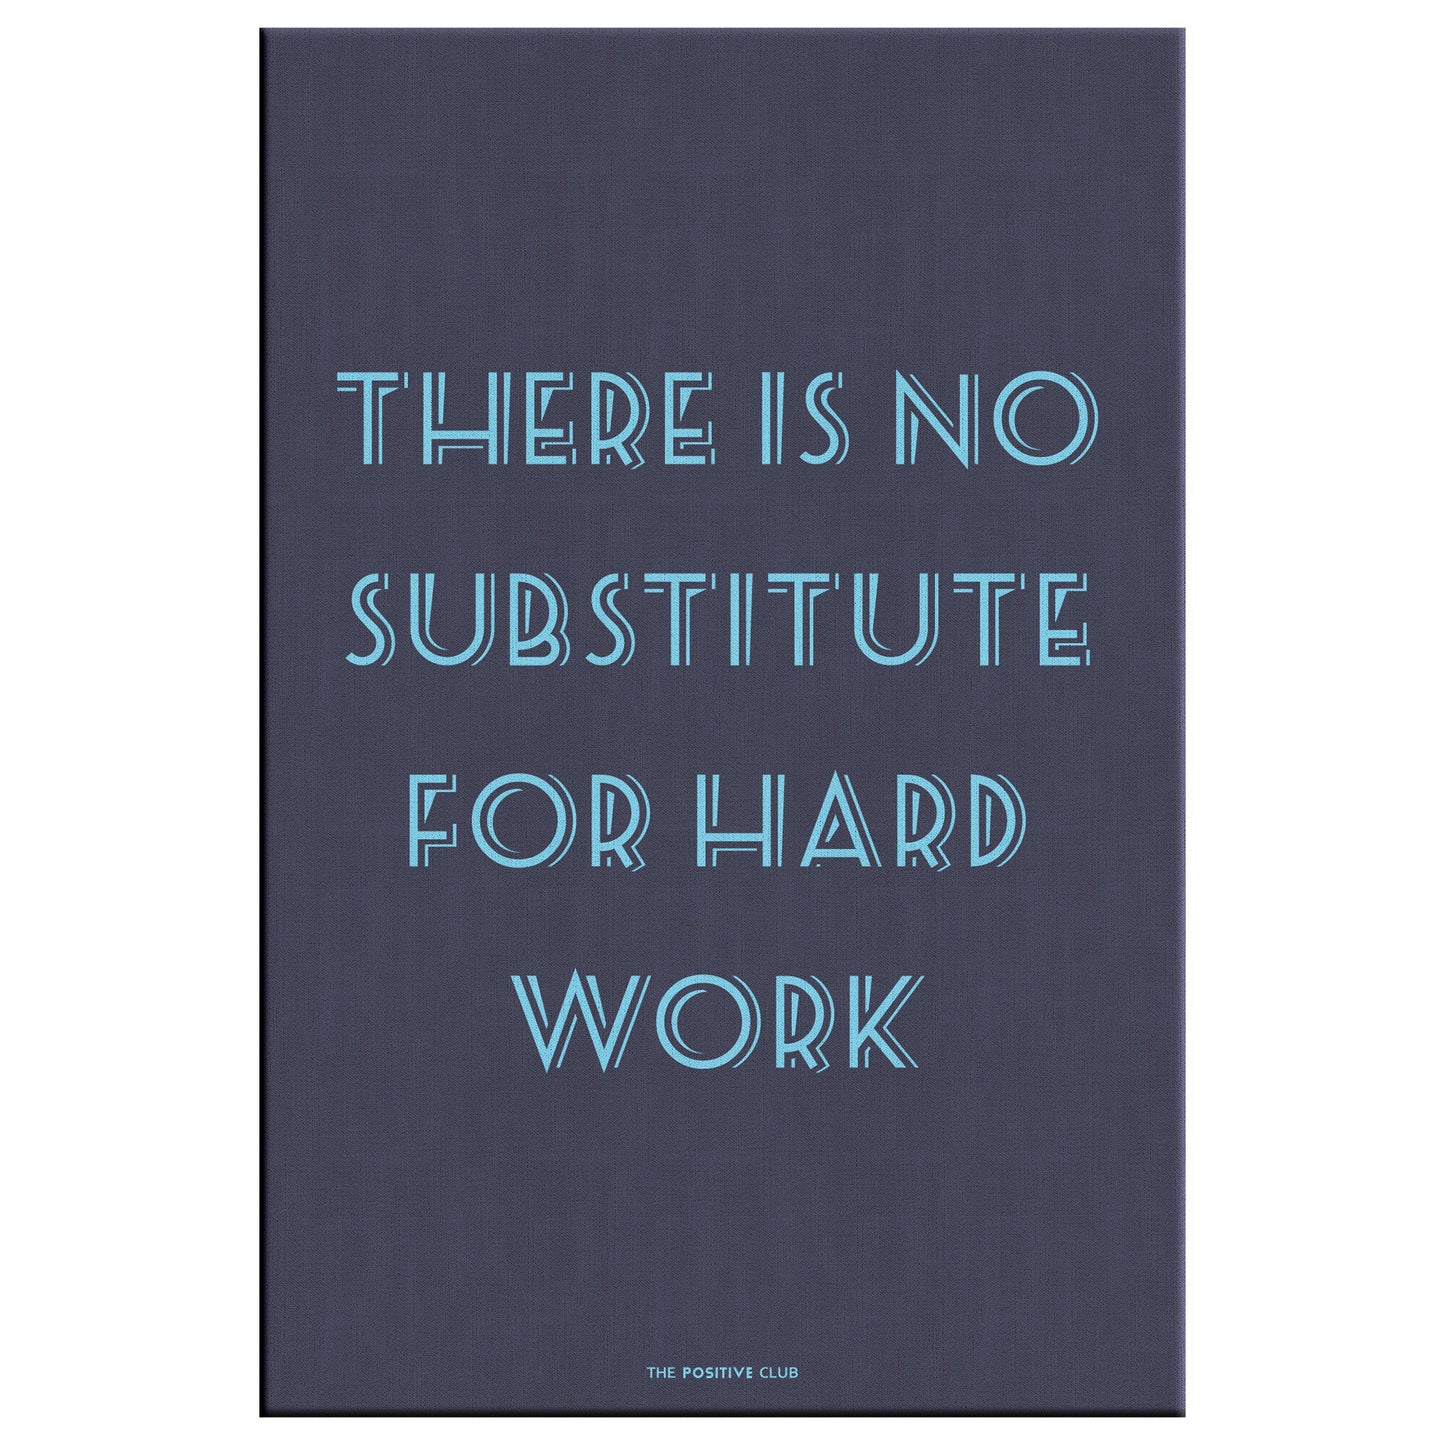 THERE IS NO SUBSTITUTE FOR HARD WORK